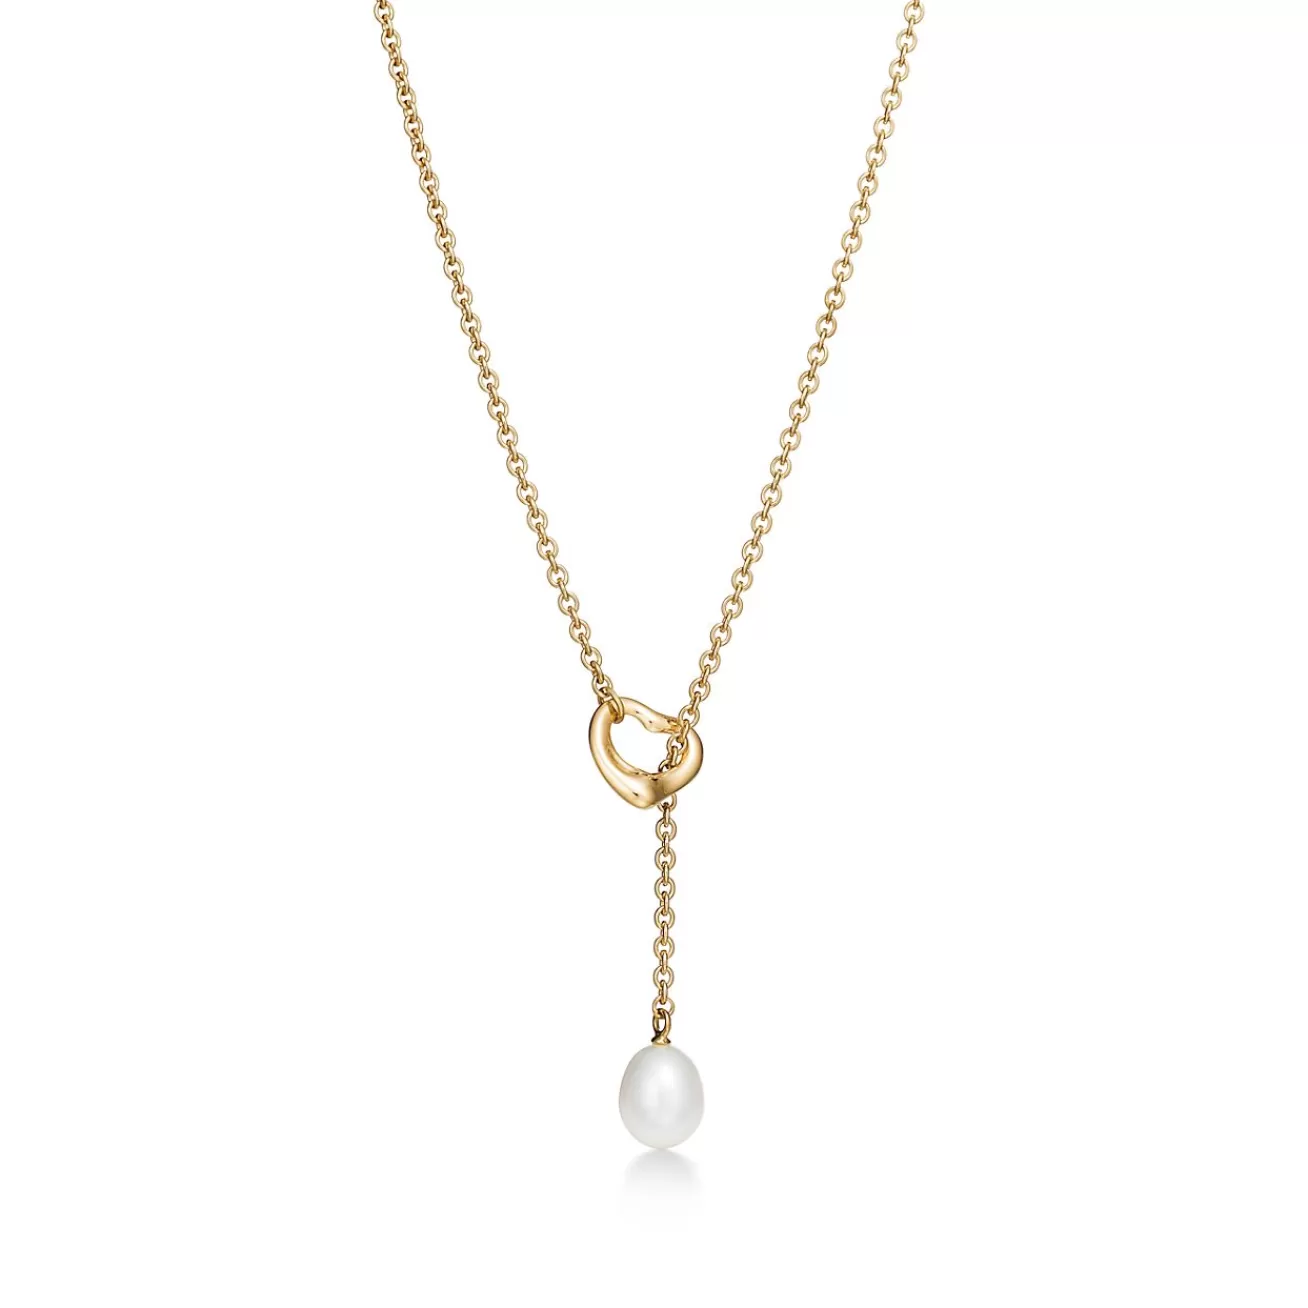 Tiffany & Co. Elsa Peretti® Open Heart Lariat Necklace in Yellow Gold with Pearls, 7.5-8 mm | ^ Necklaces & Pendants | Gold Jewelry